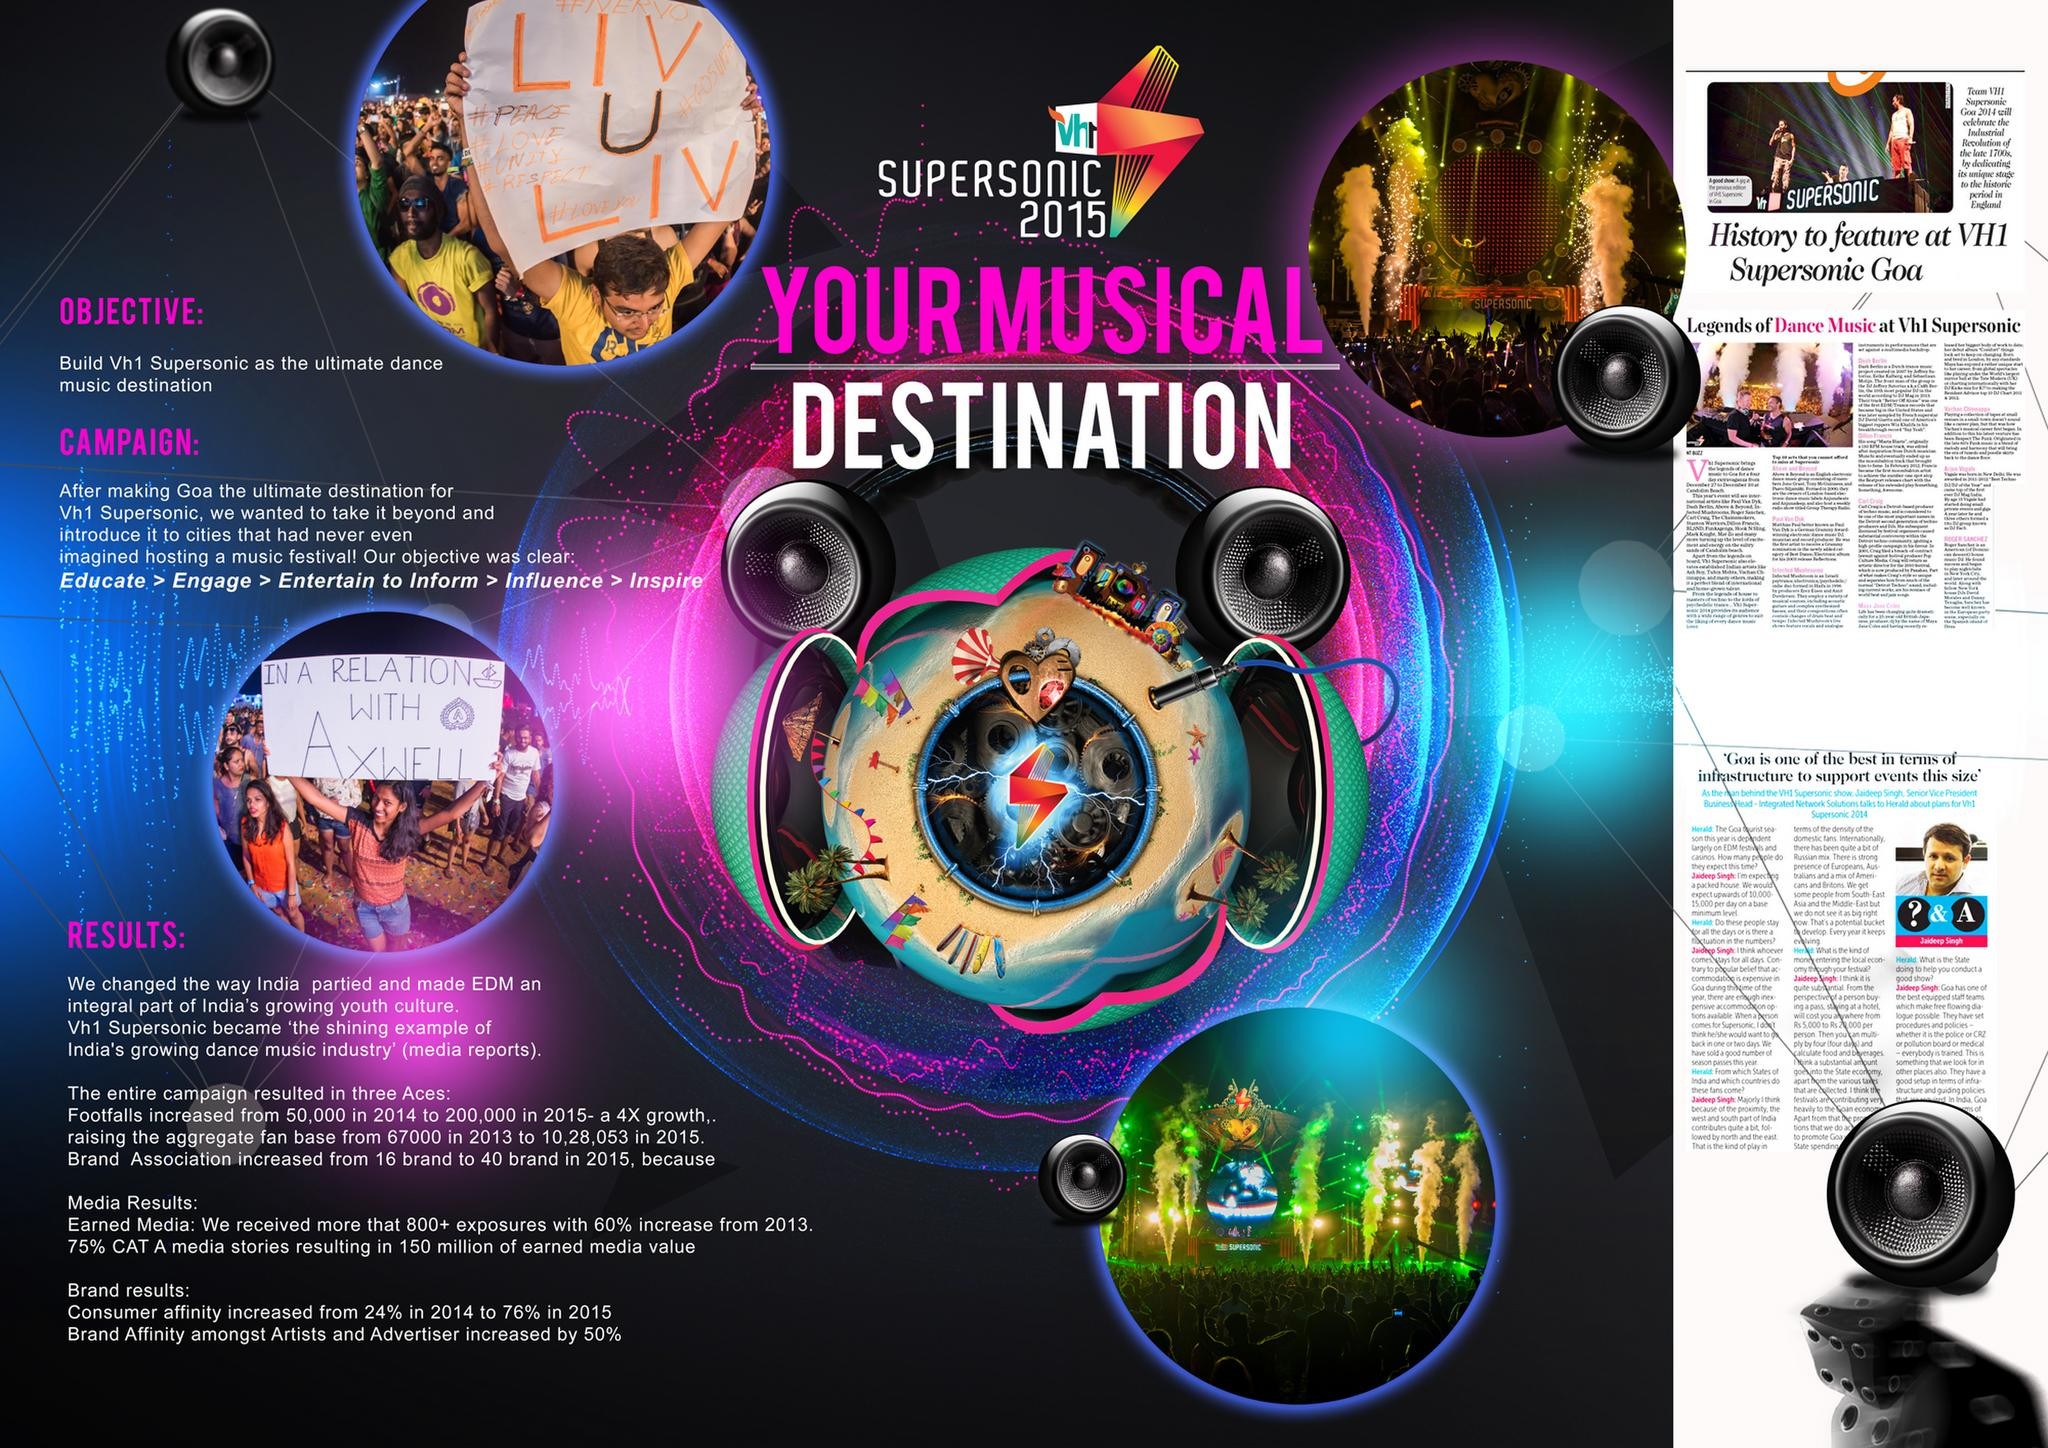 Vh1 Supersonic: Your Musical destination